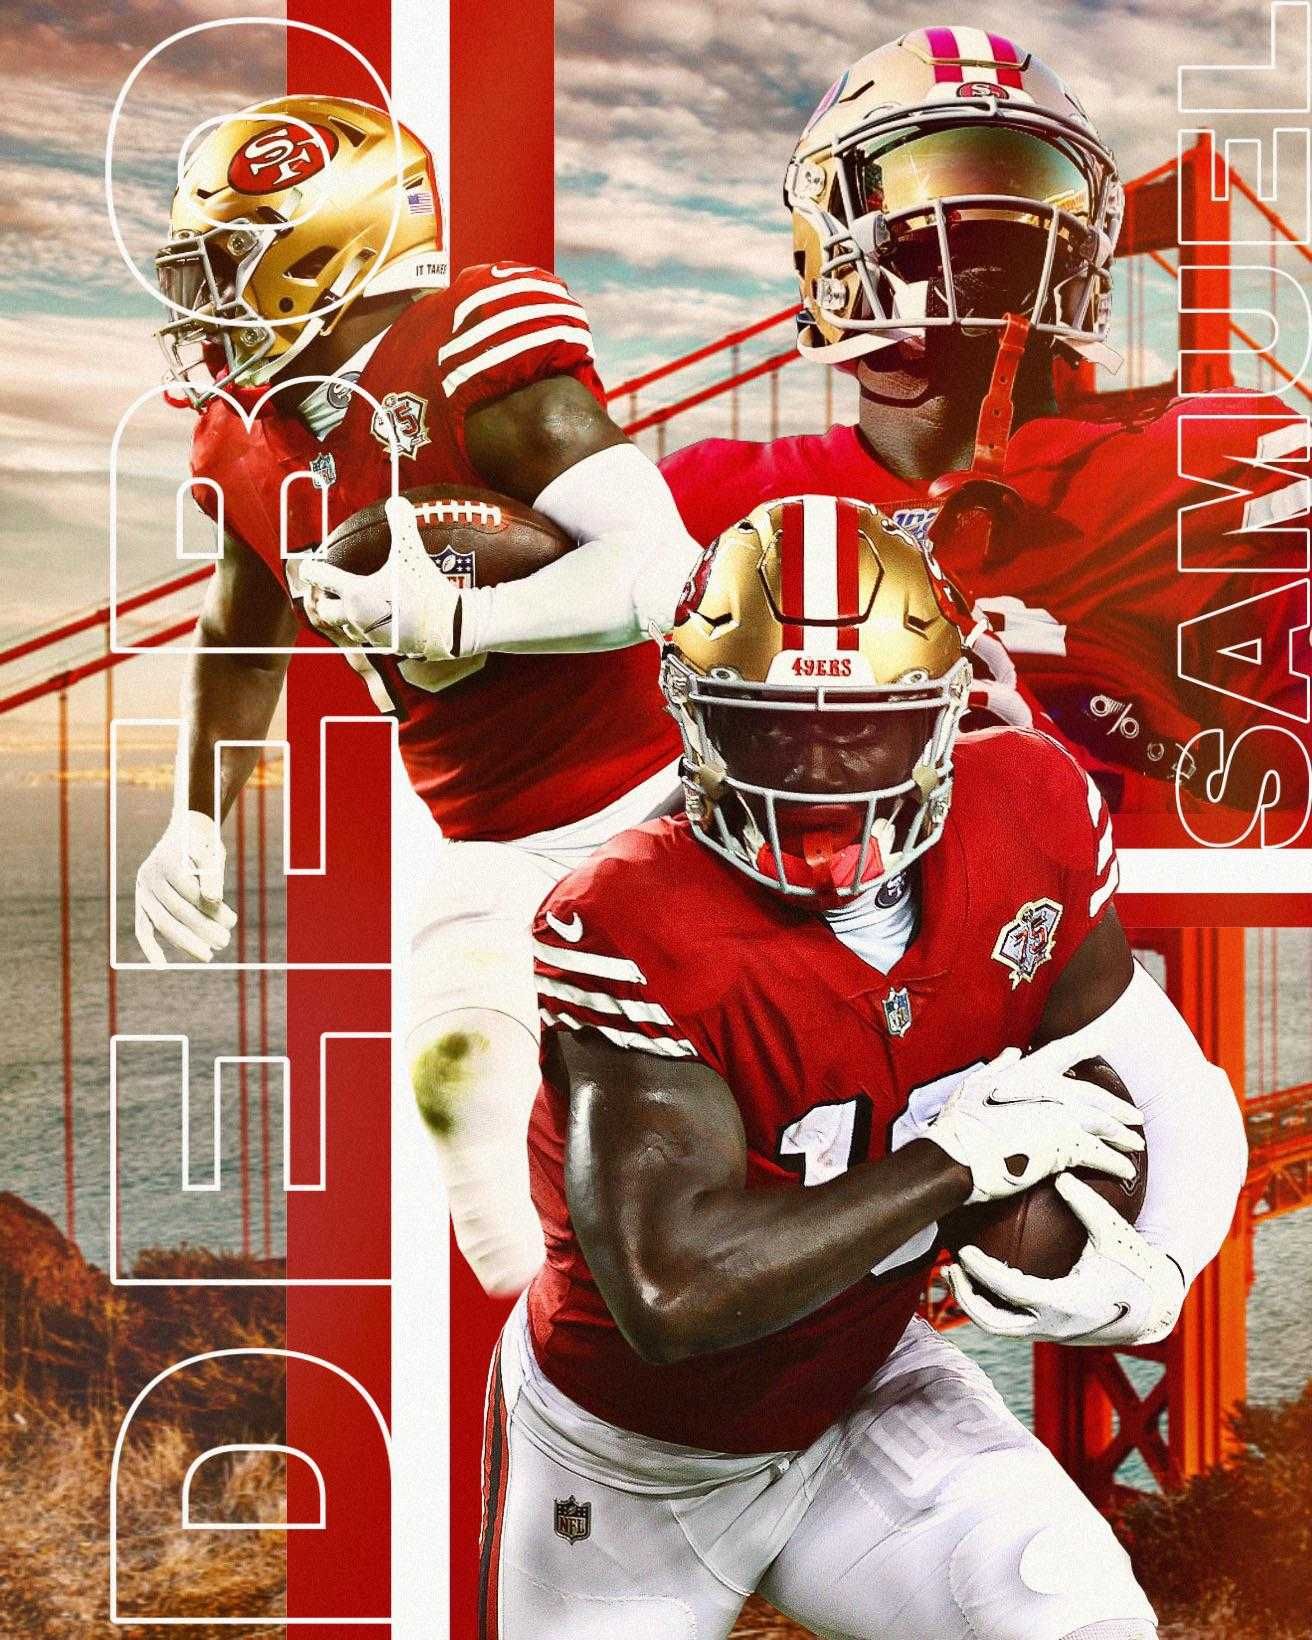 49ers Webzone on Twitter 49ers 2022 schedule wallpaper for your phone  Pacific Time httpstcoKH6w4jCj3E  Twitter